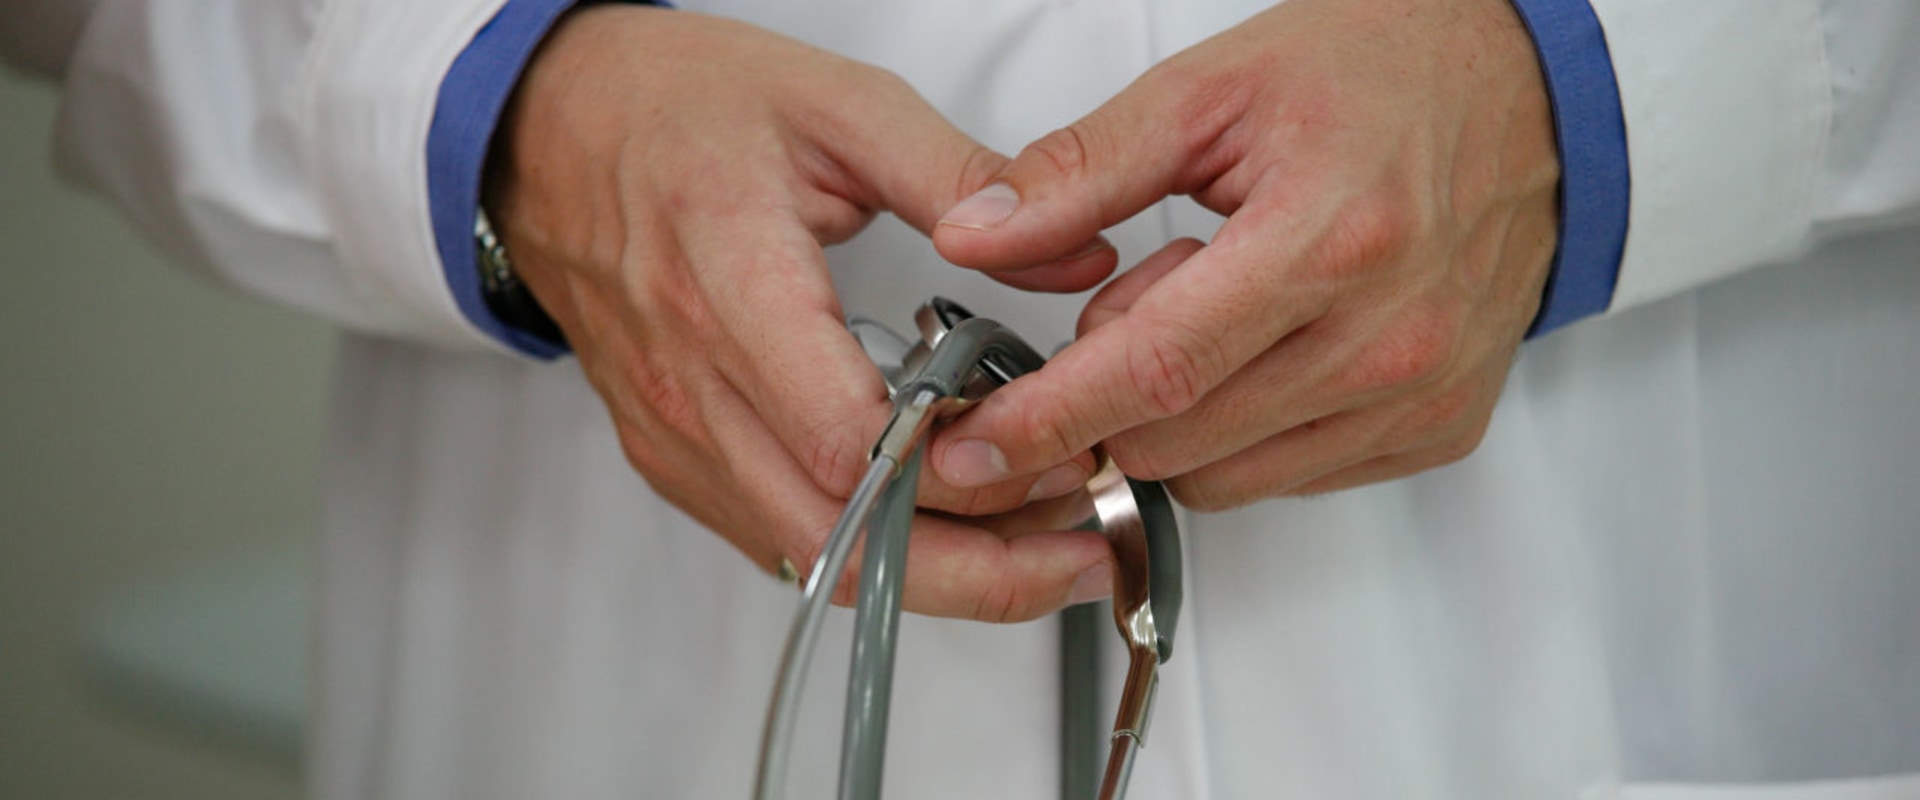 Are osteopathic physicians real doctors?